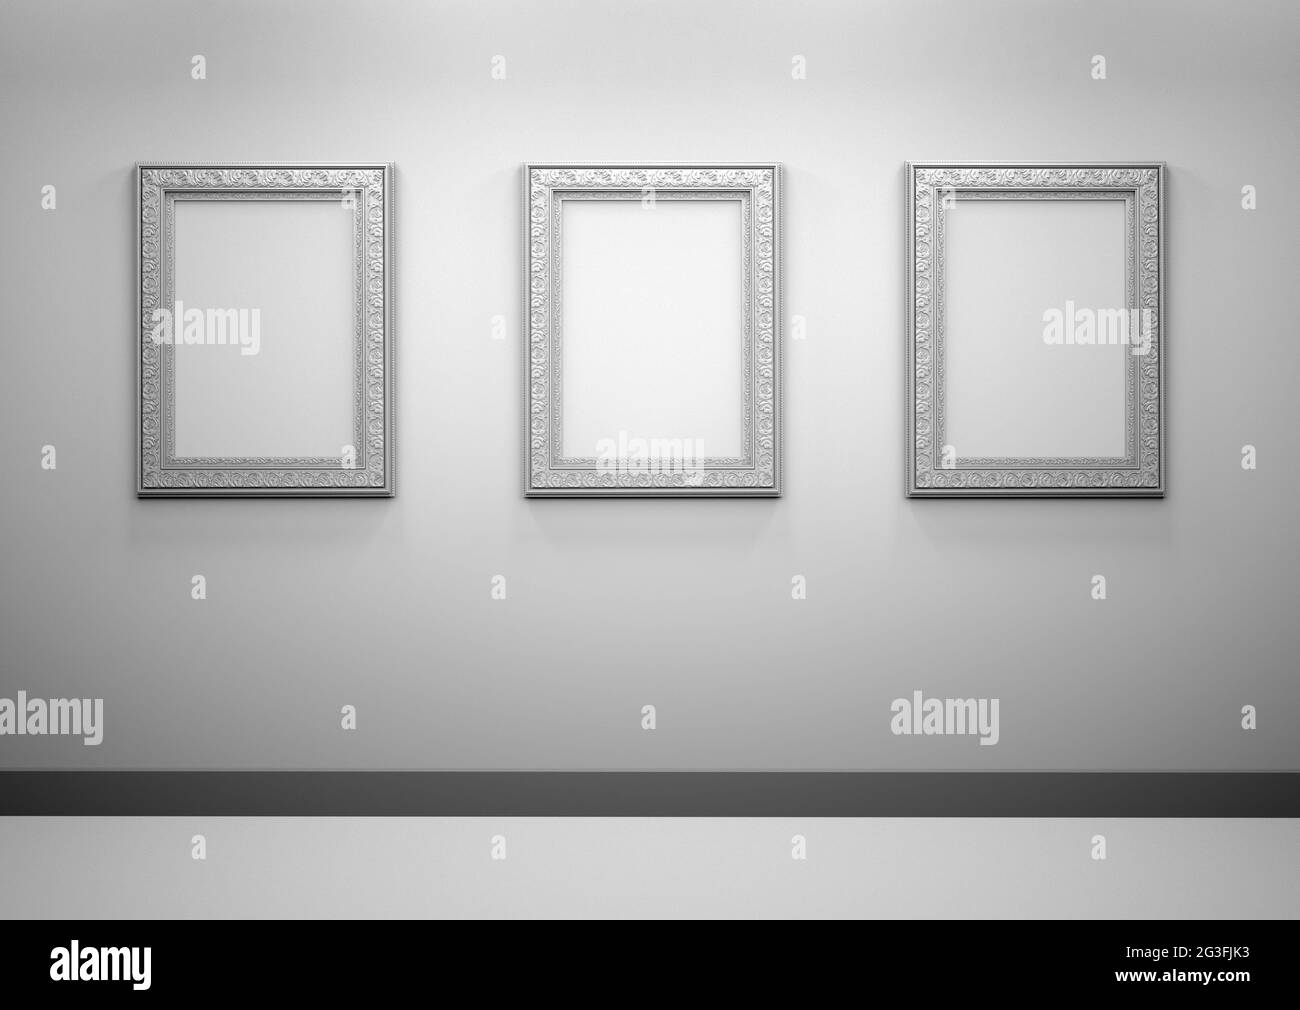 Gallery Interior with empty frames on wall Stock Photo